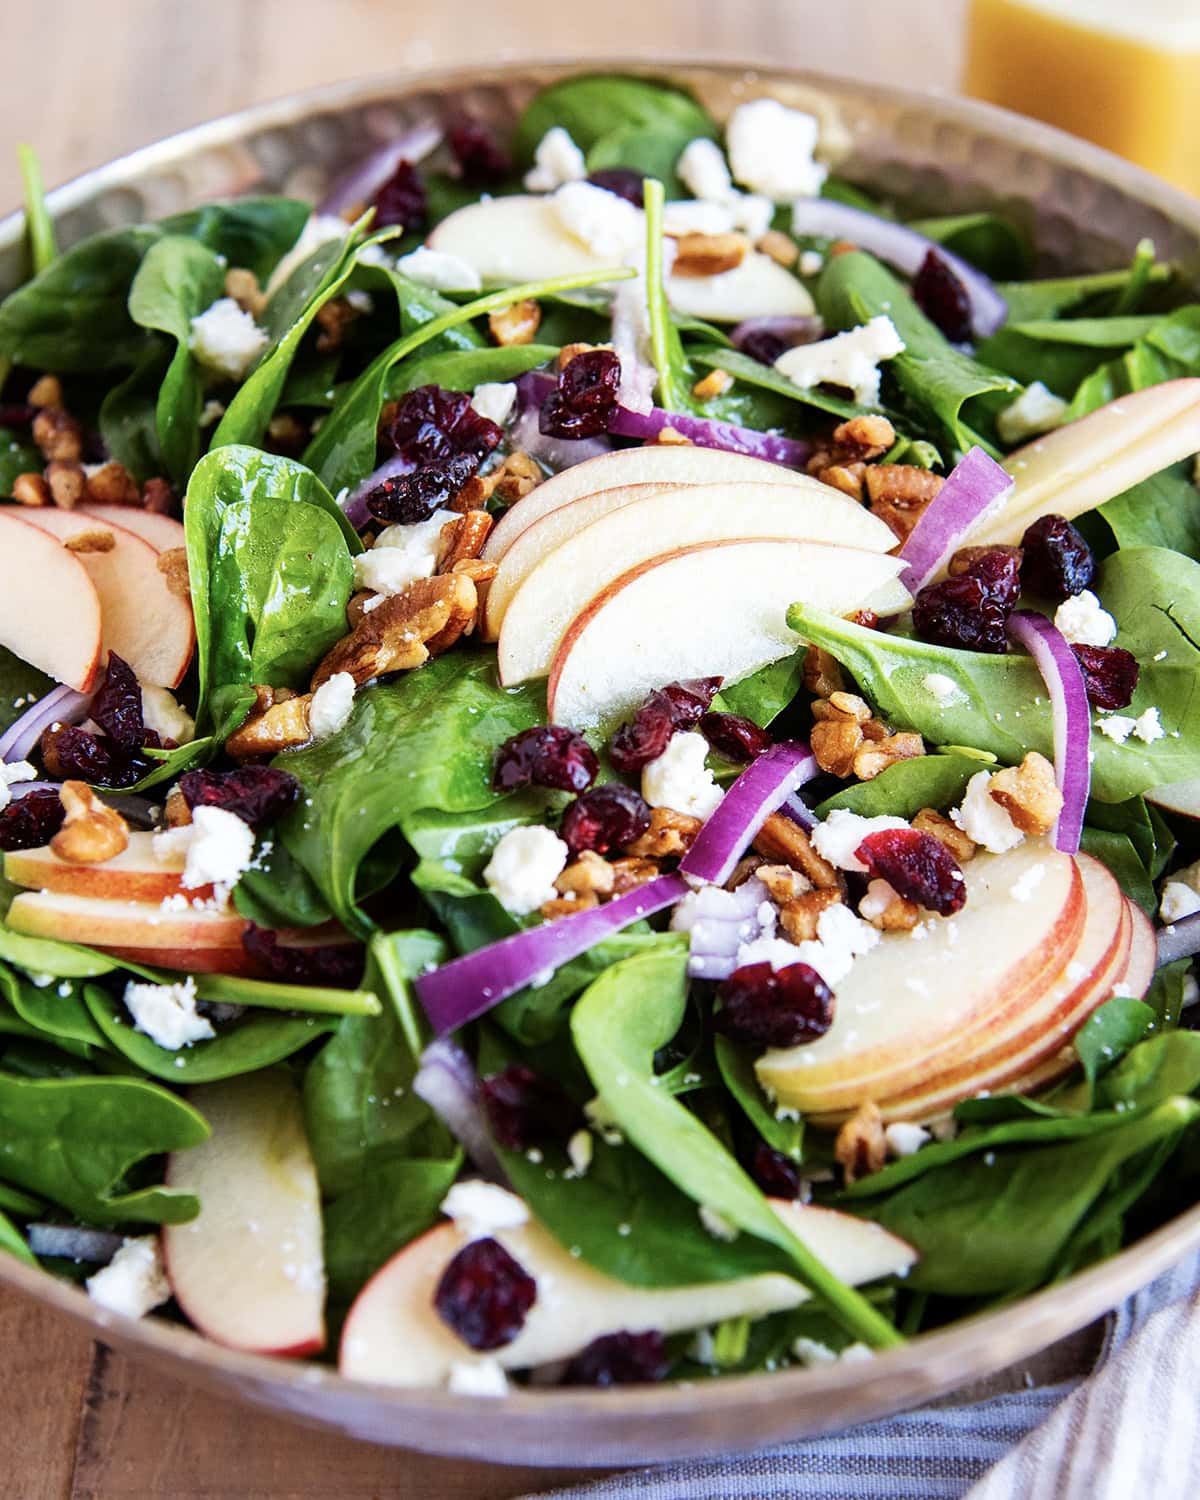 A bowl of spinach salad with apple slices, red onion, cranberries, and feta.